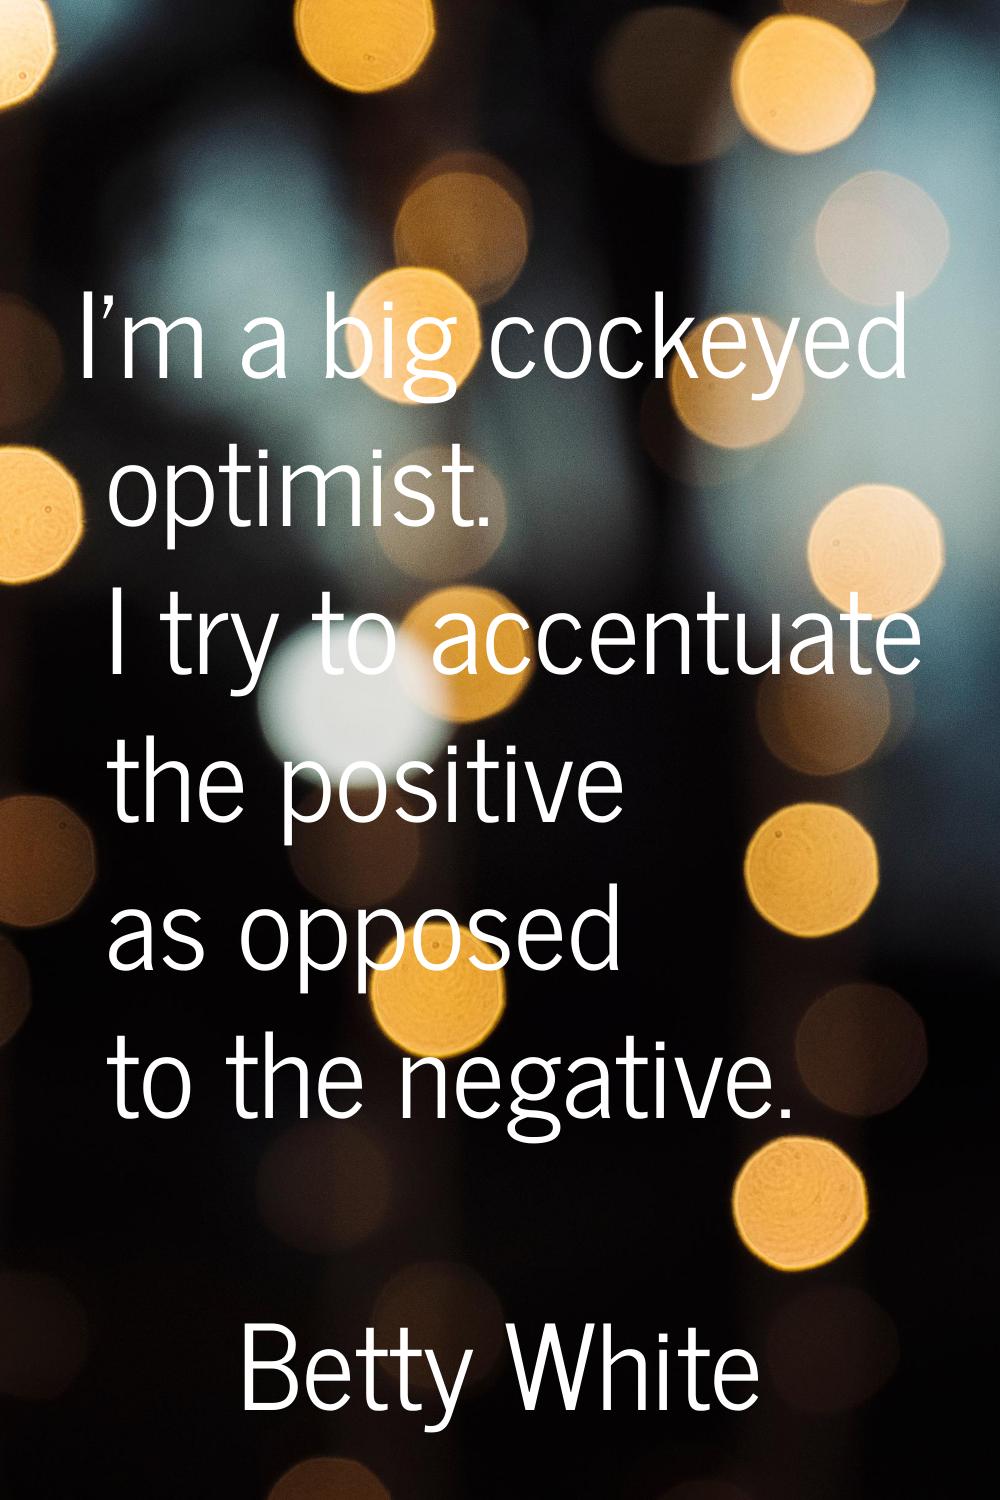 I'm a big cockeyed optimist. I try to accentuate the positive as opposed to the negative.